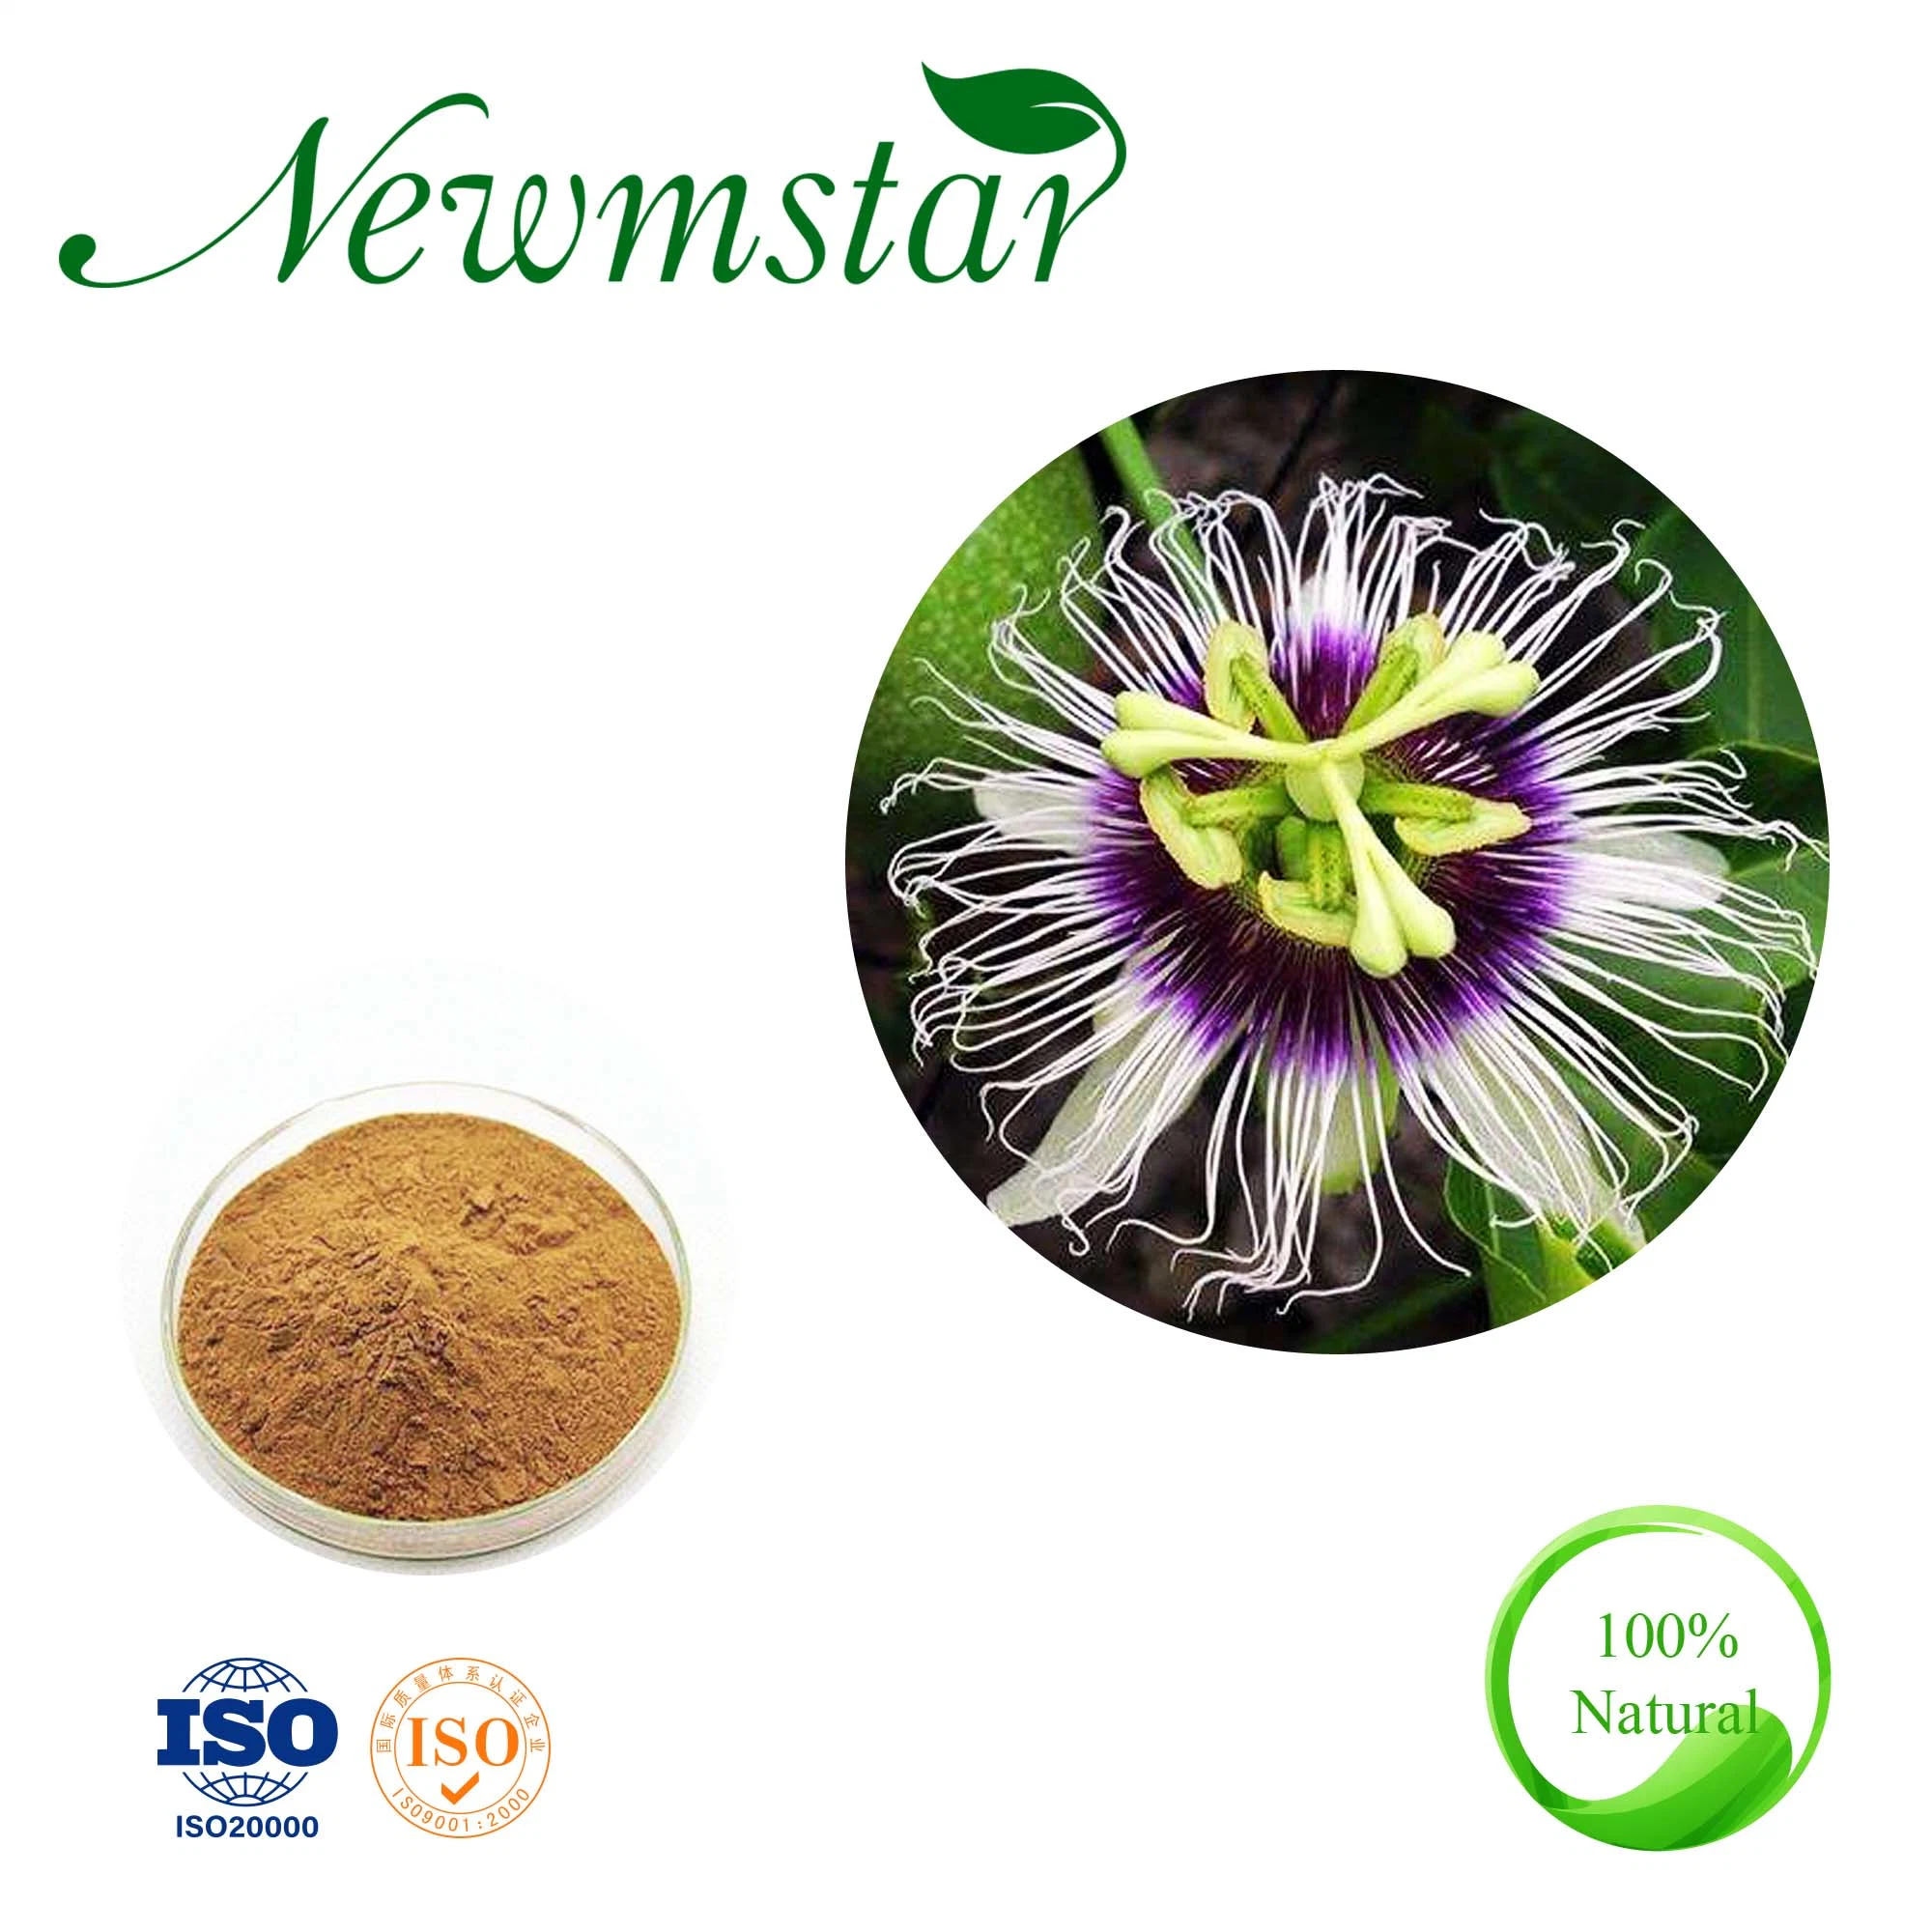 Natural Passiflora Leaves Extract Use to Health Care Product, with ISO22000, HACCP, Halal